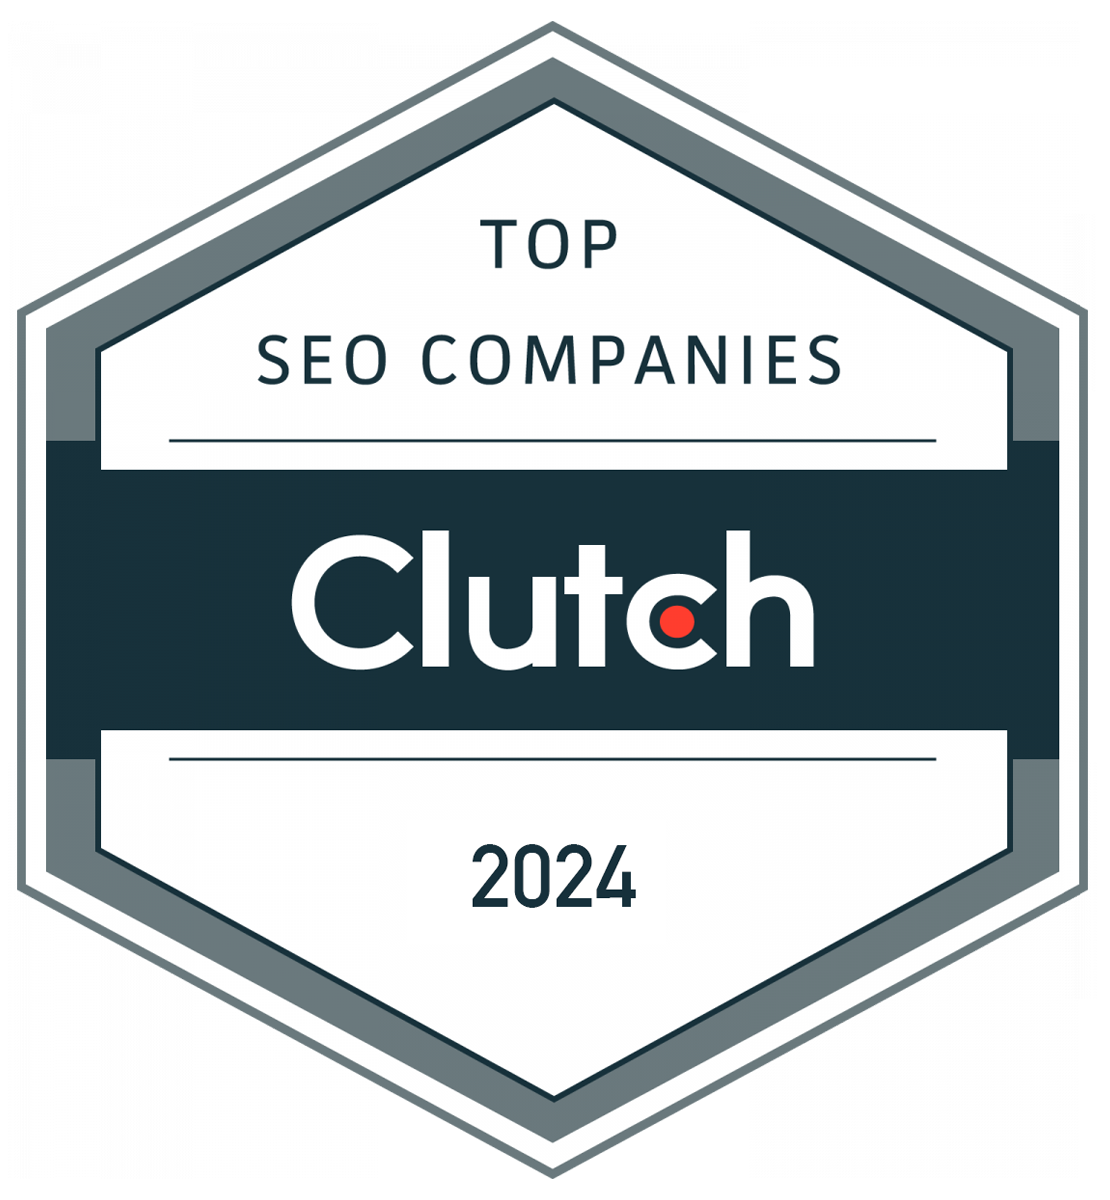 Top-SEO-Companies-2021-by-Clutch-new-resize